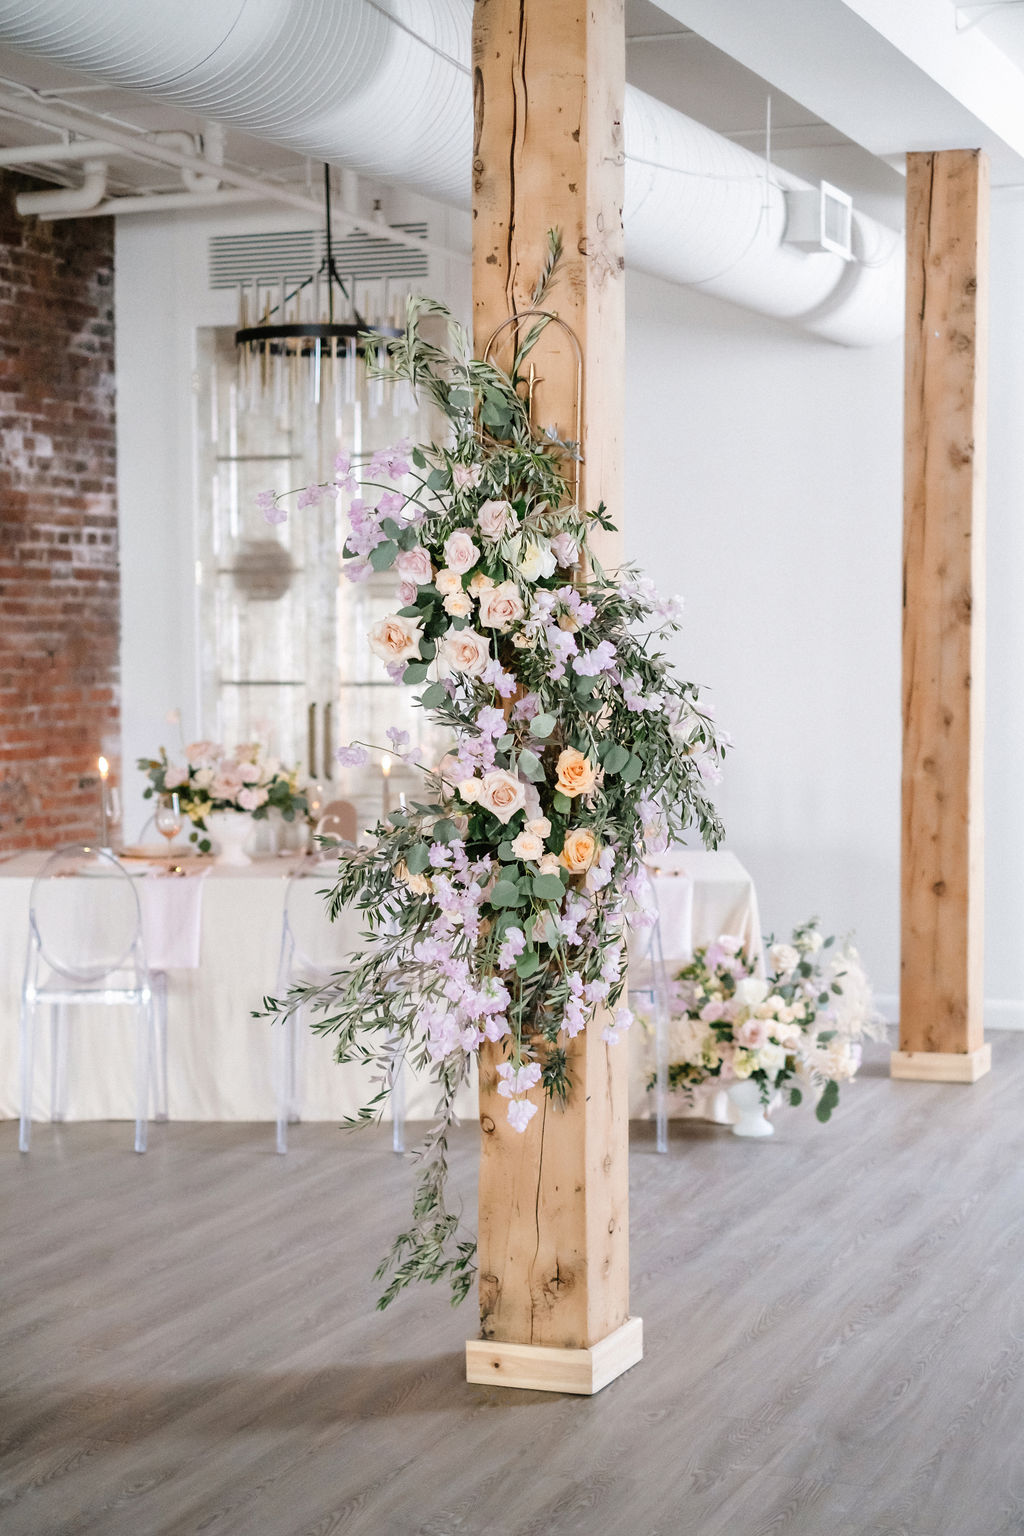 Flower installation at Venue 308 featuring orange, cream, lilac and pink flowers